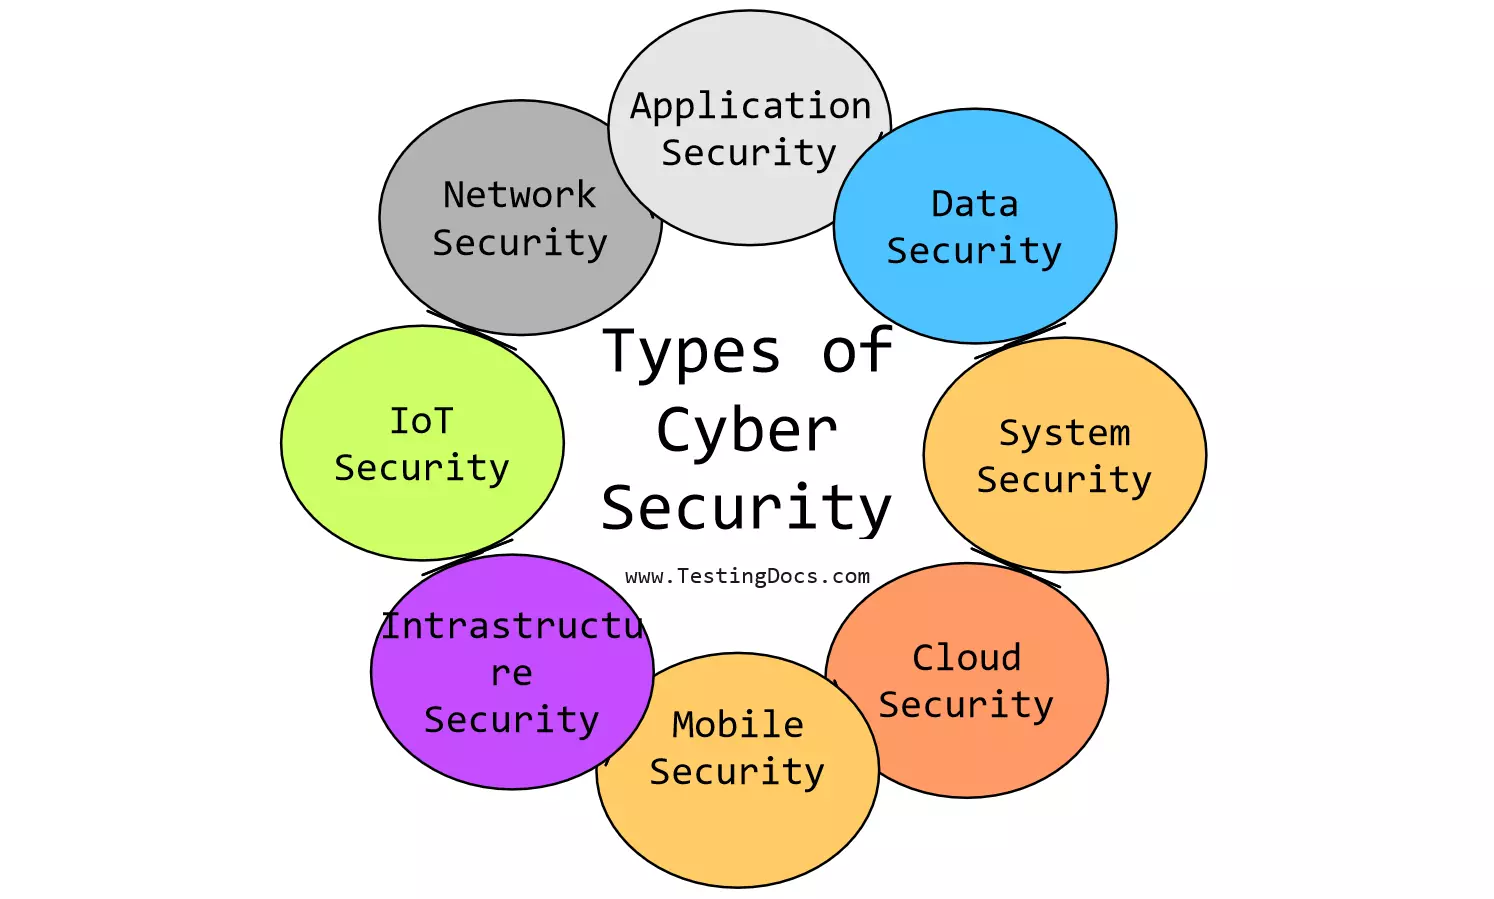 Types of Cyber Security